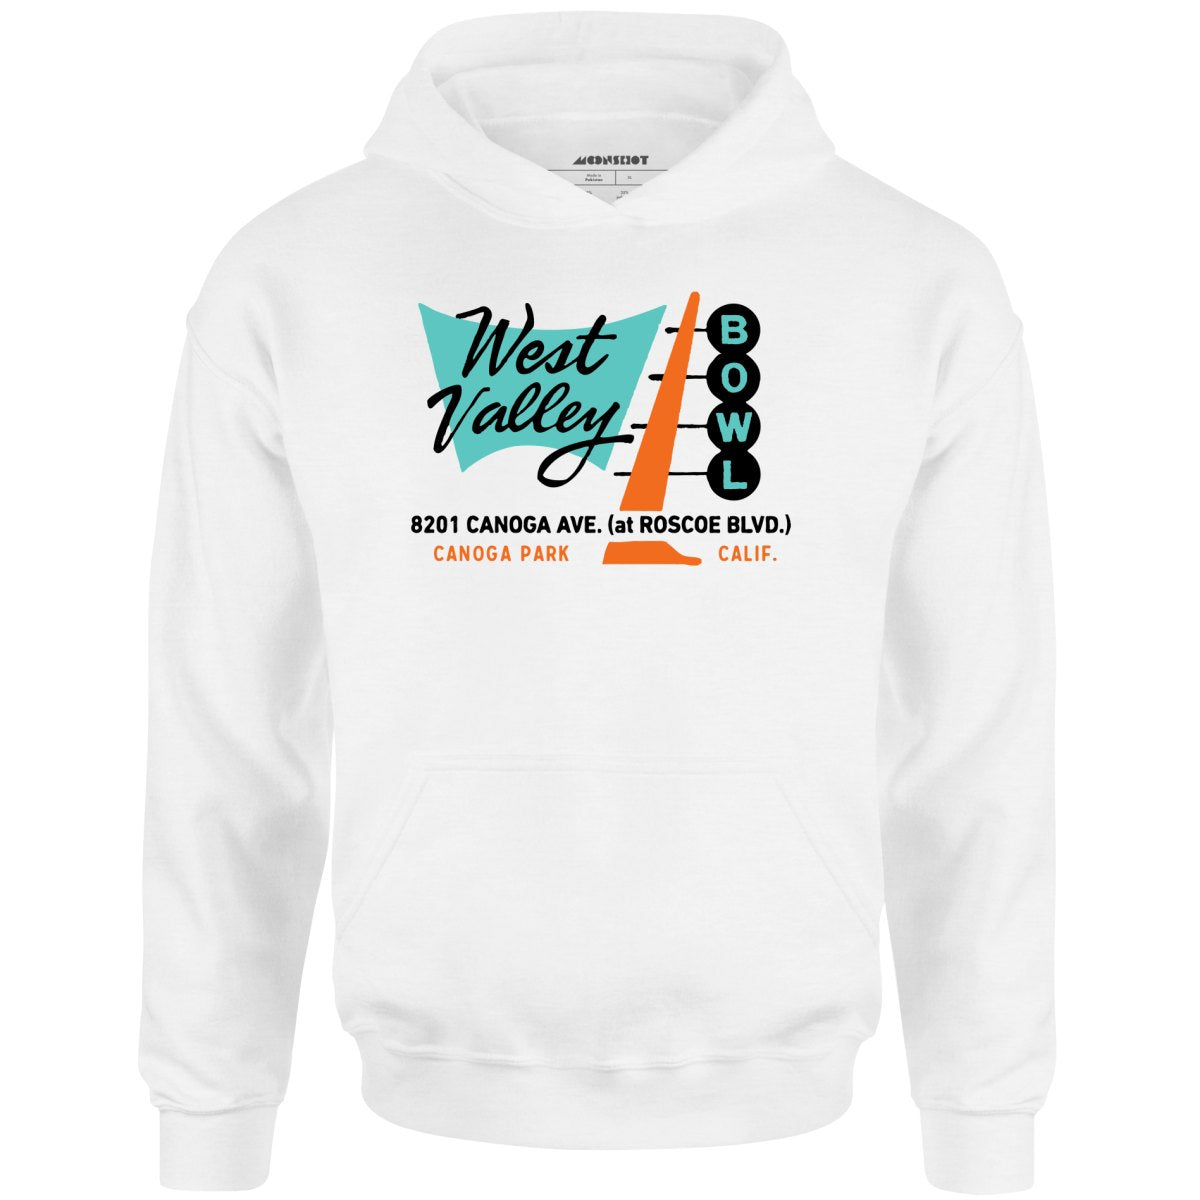 West Valley Bowl - Canoga Park, CA - Vintage Bowling Alley - Unisex Hoodie